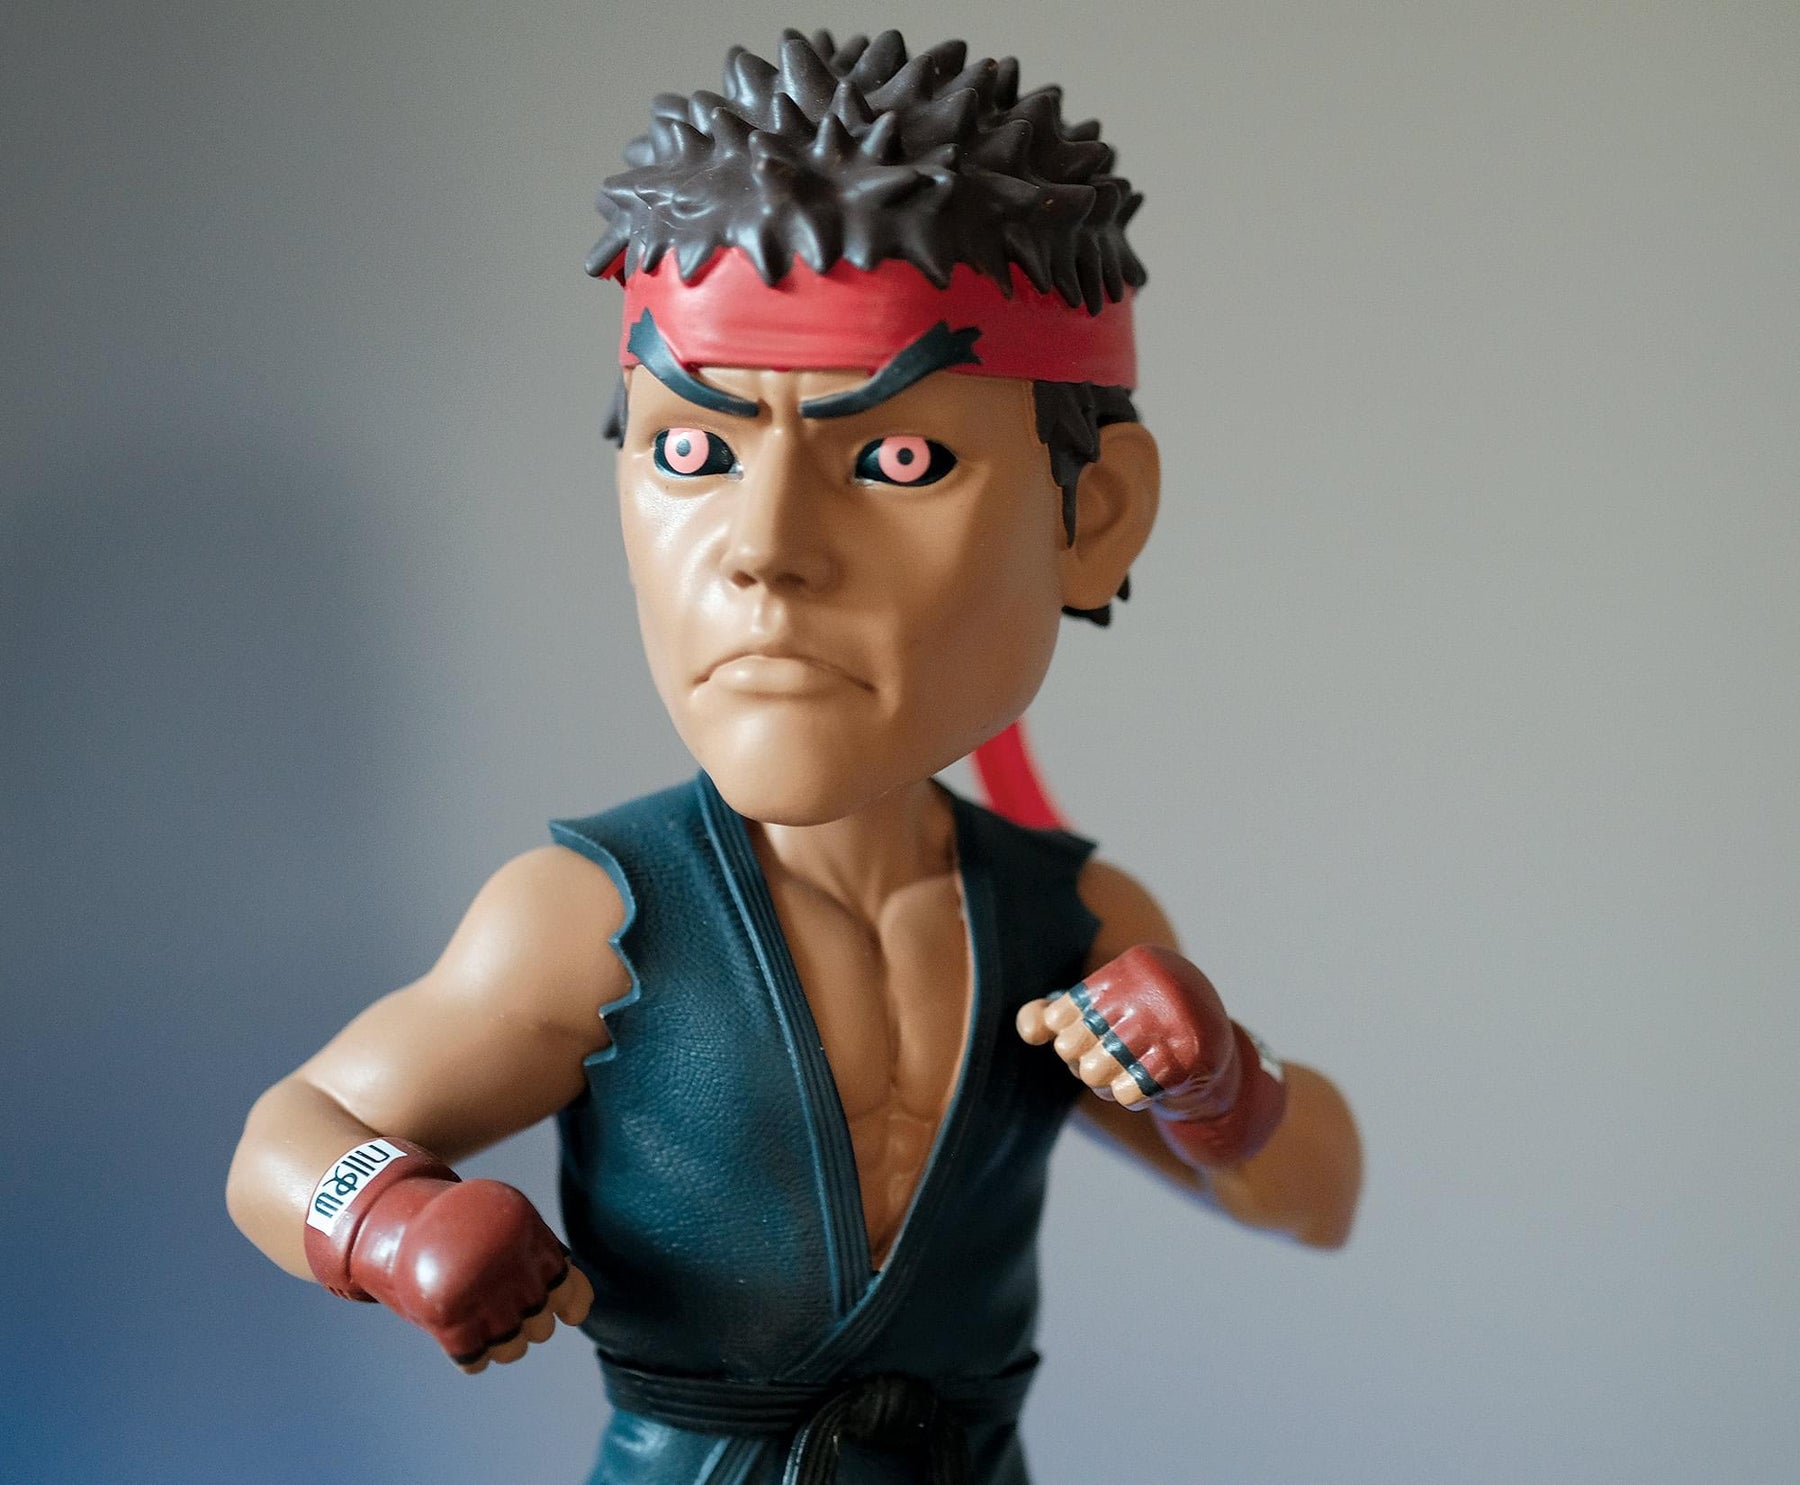 Street Fighter Evil Ryu 8-Inch Resin Bobblehead Figure | Toynk Exclusive